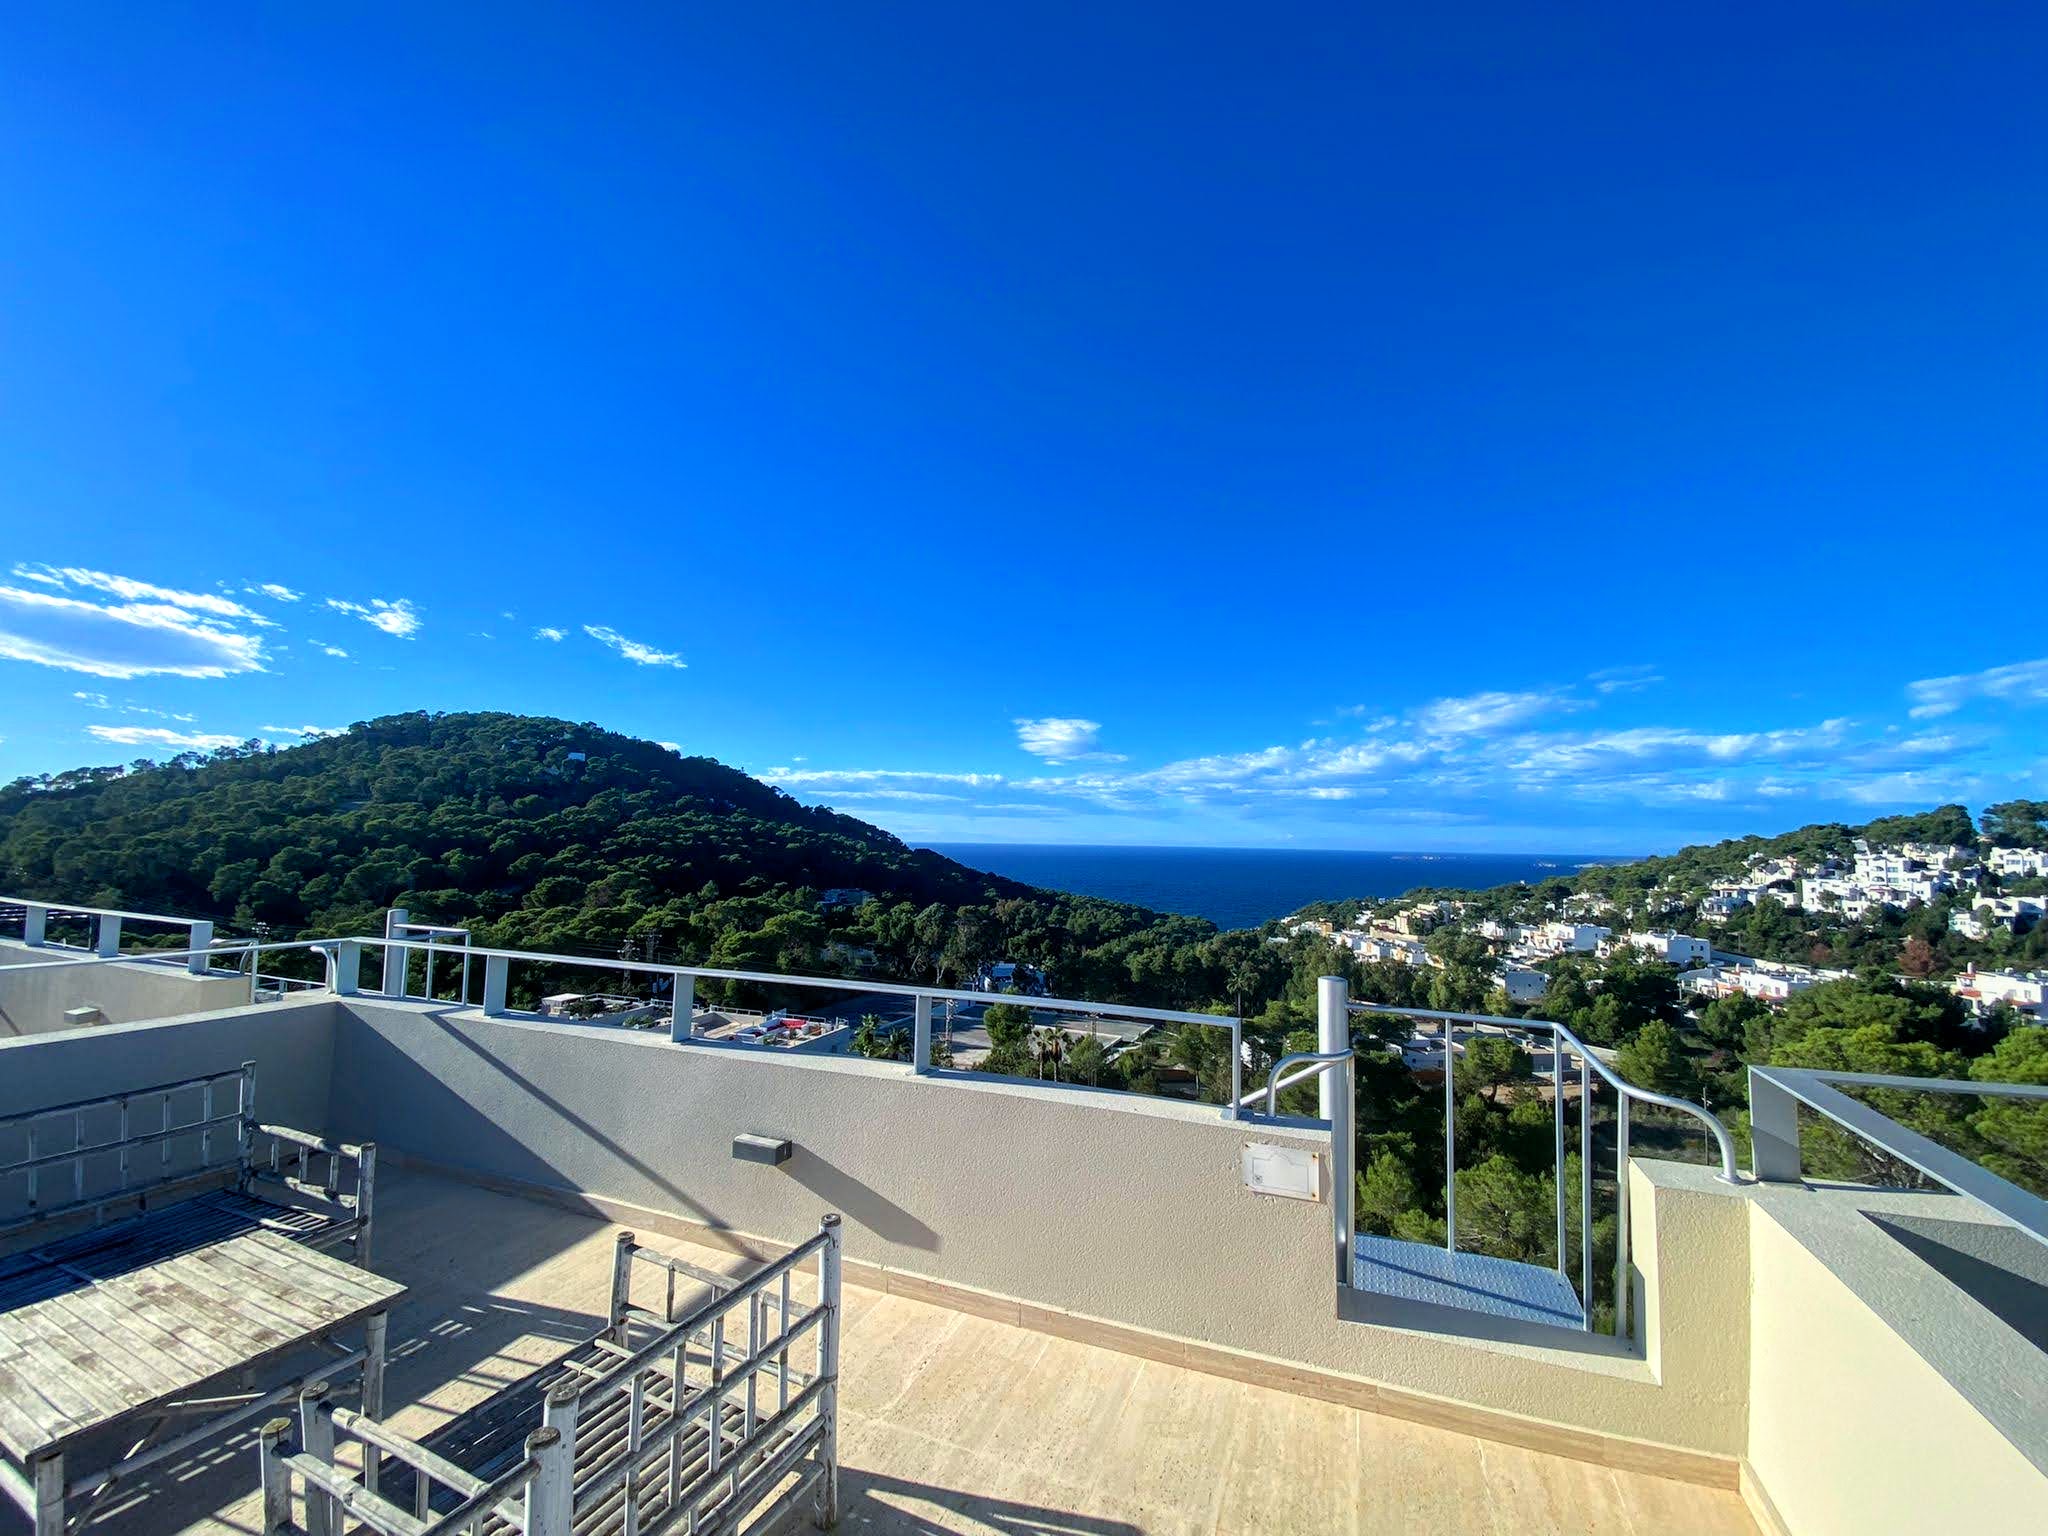 Duplex penthouse with stunning views of the sea and sunset